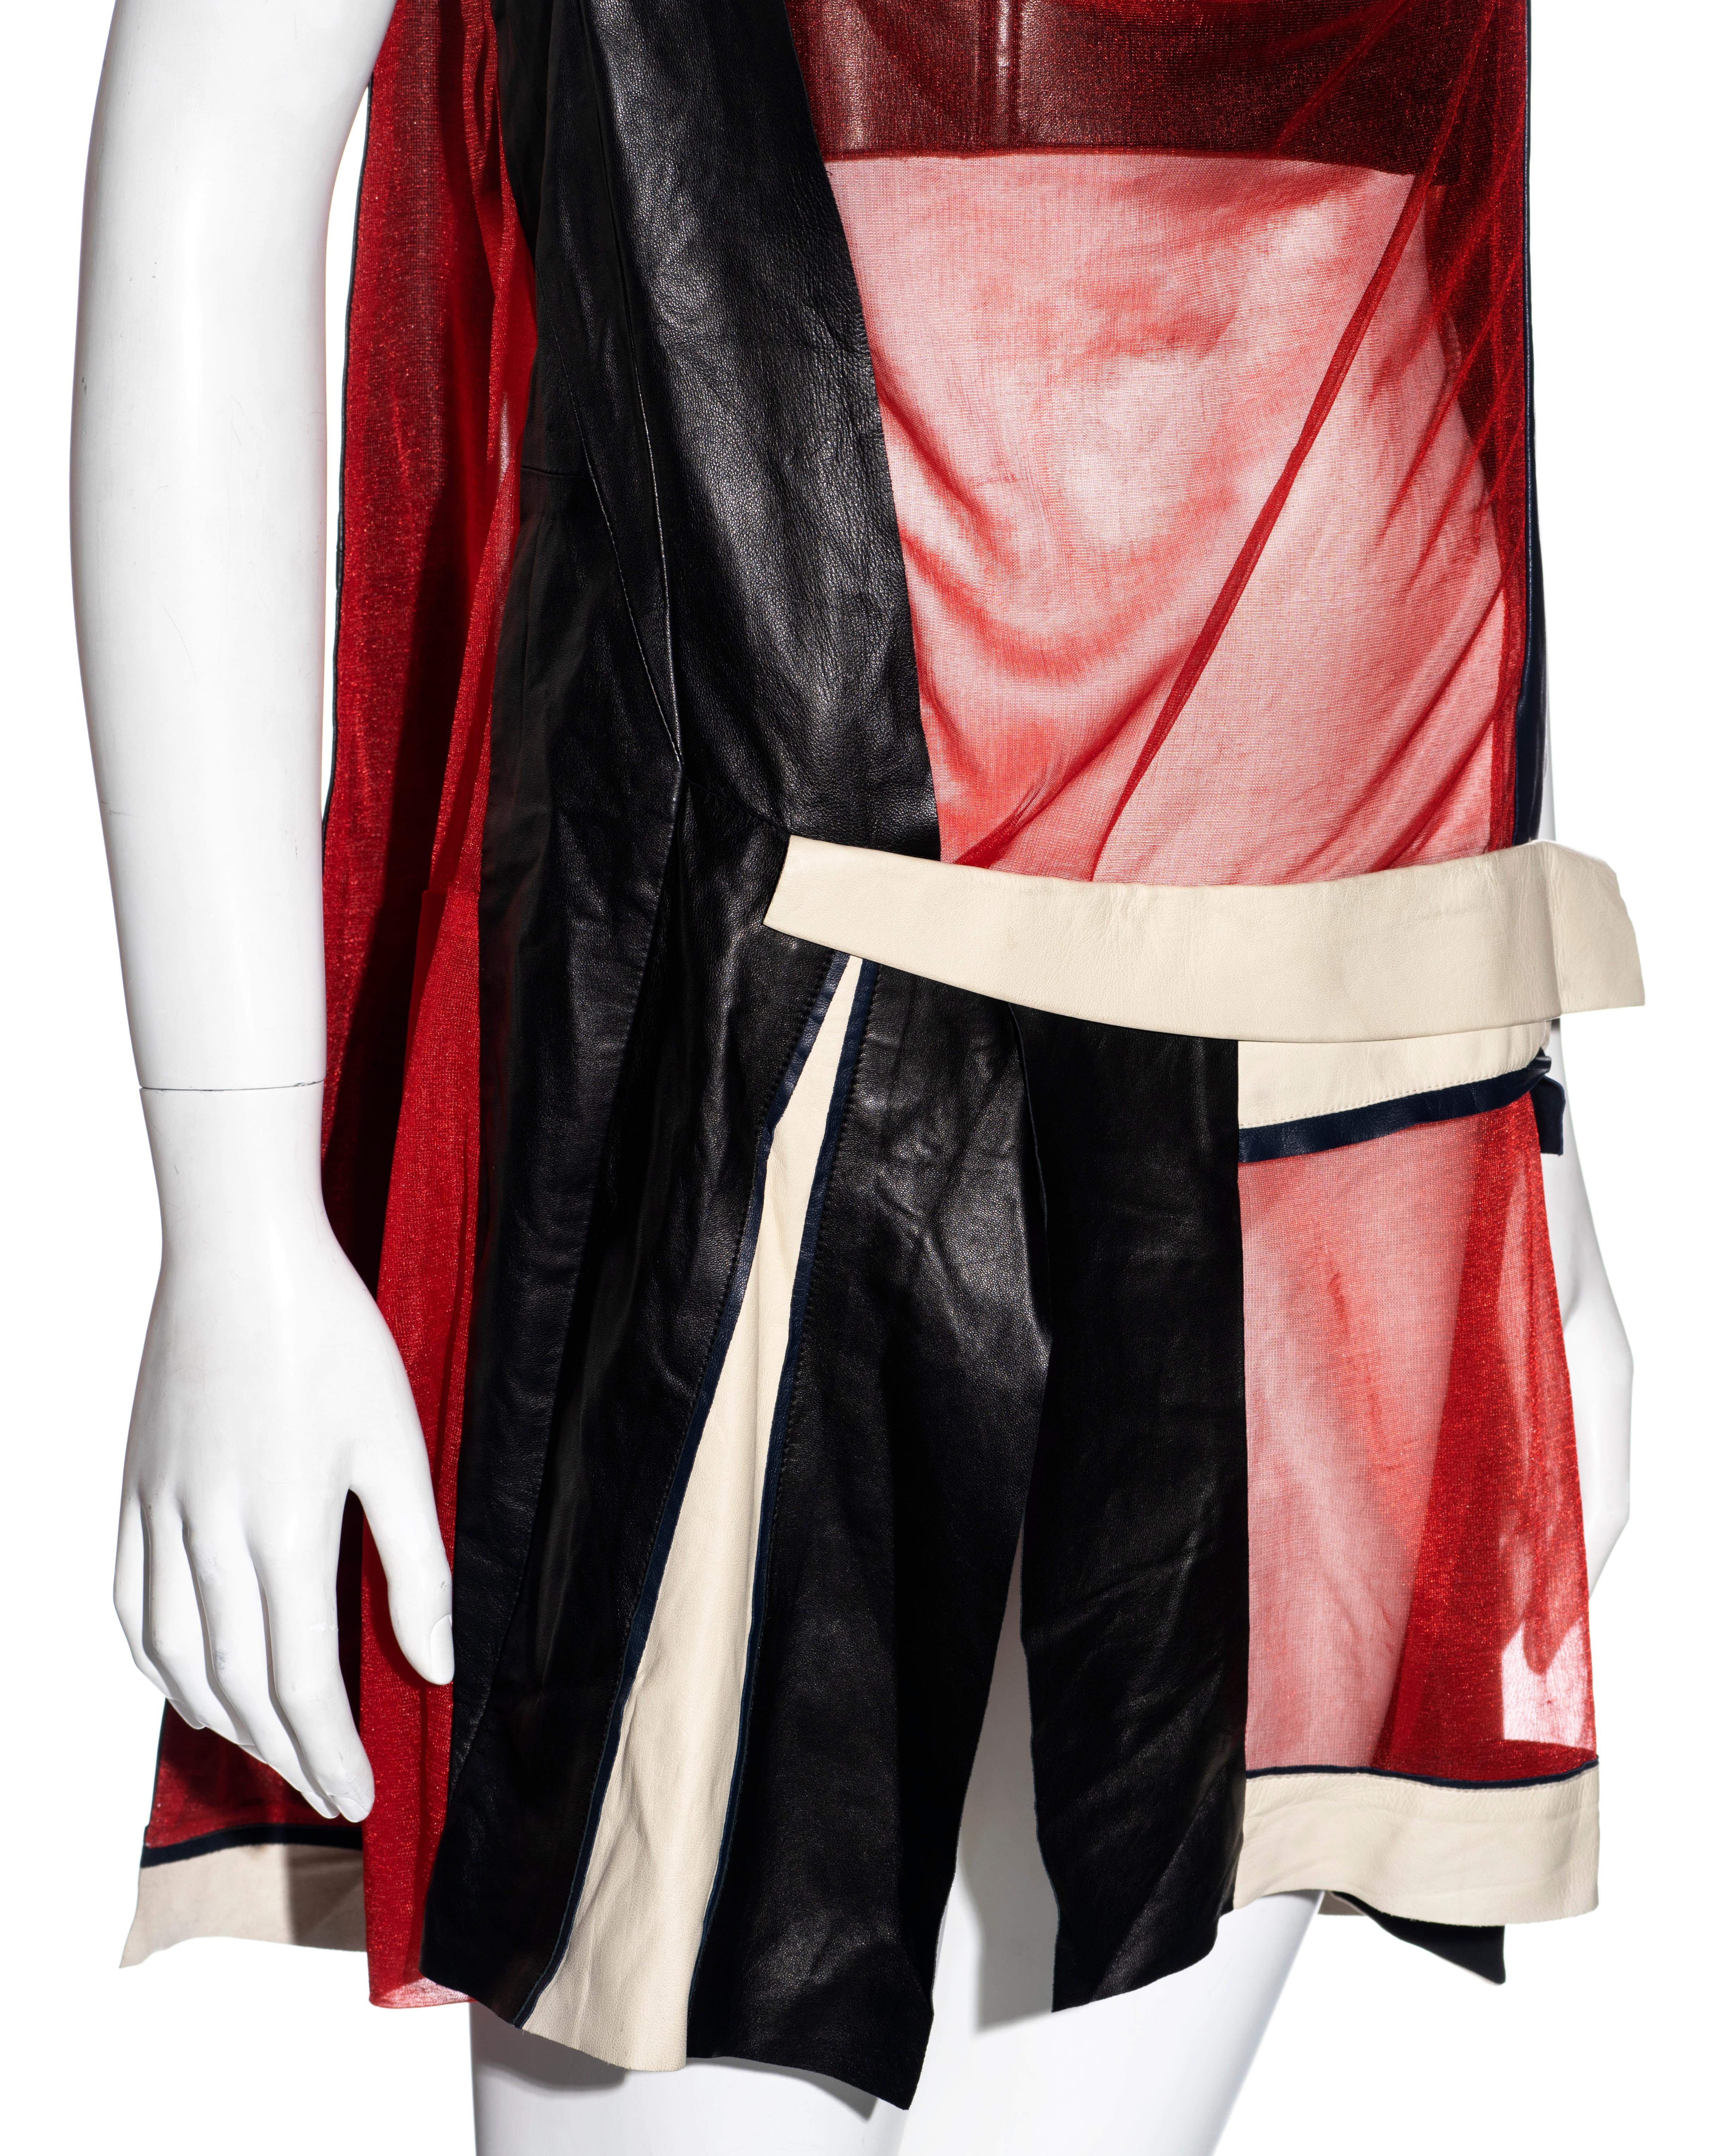 Balenciaga by Nicolas Ghesquière black and red leather mini dress, ss 2010 For Sale 1